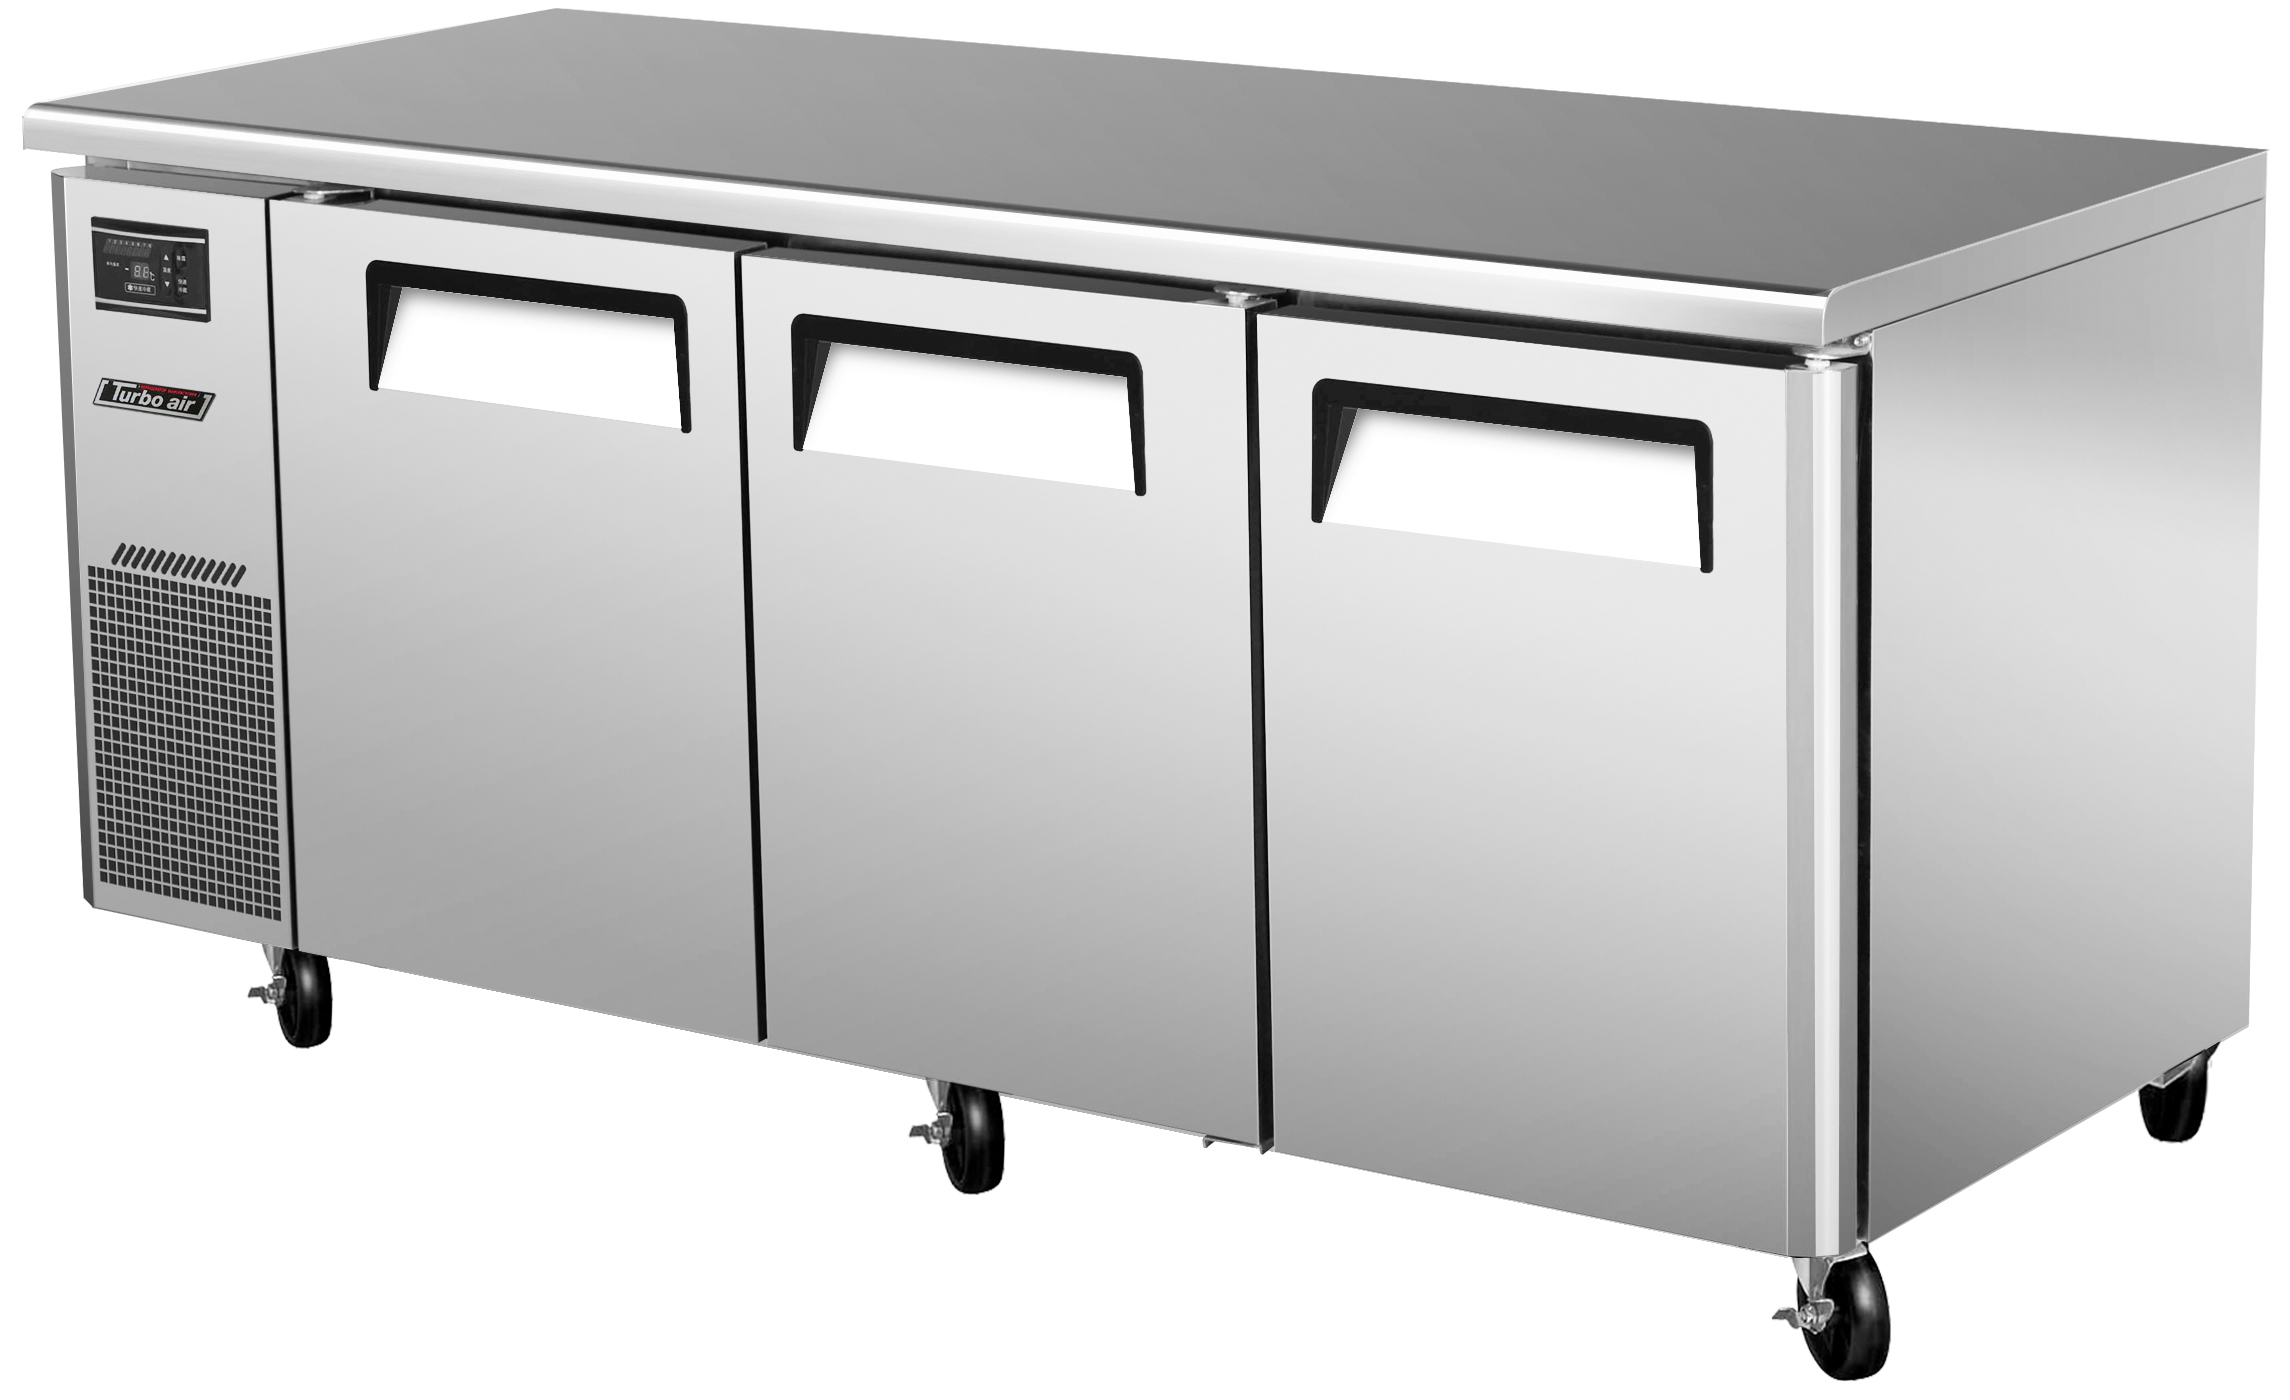 J Series Side Mount Undercounter Refrigerator - Click Image to Close